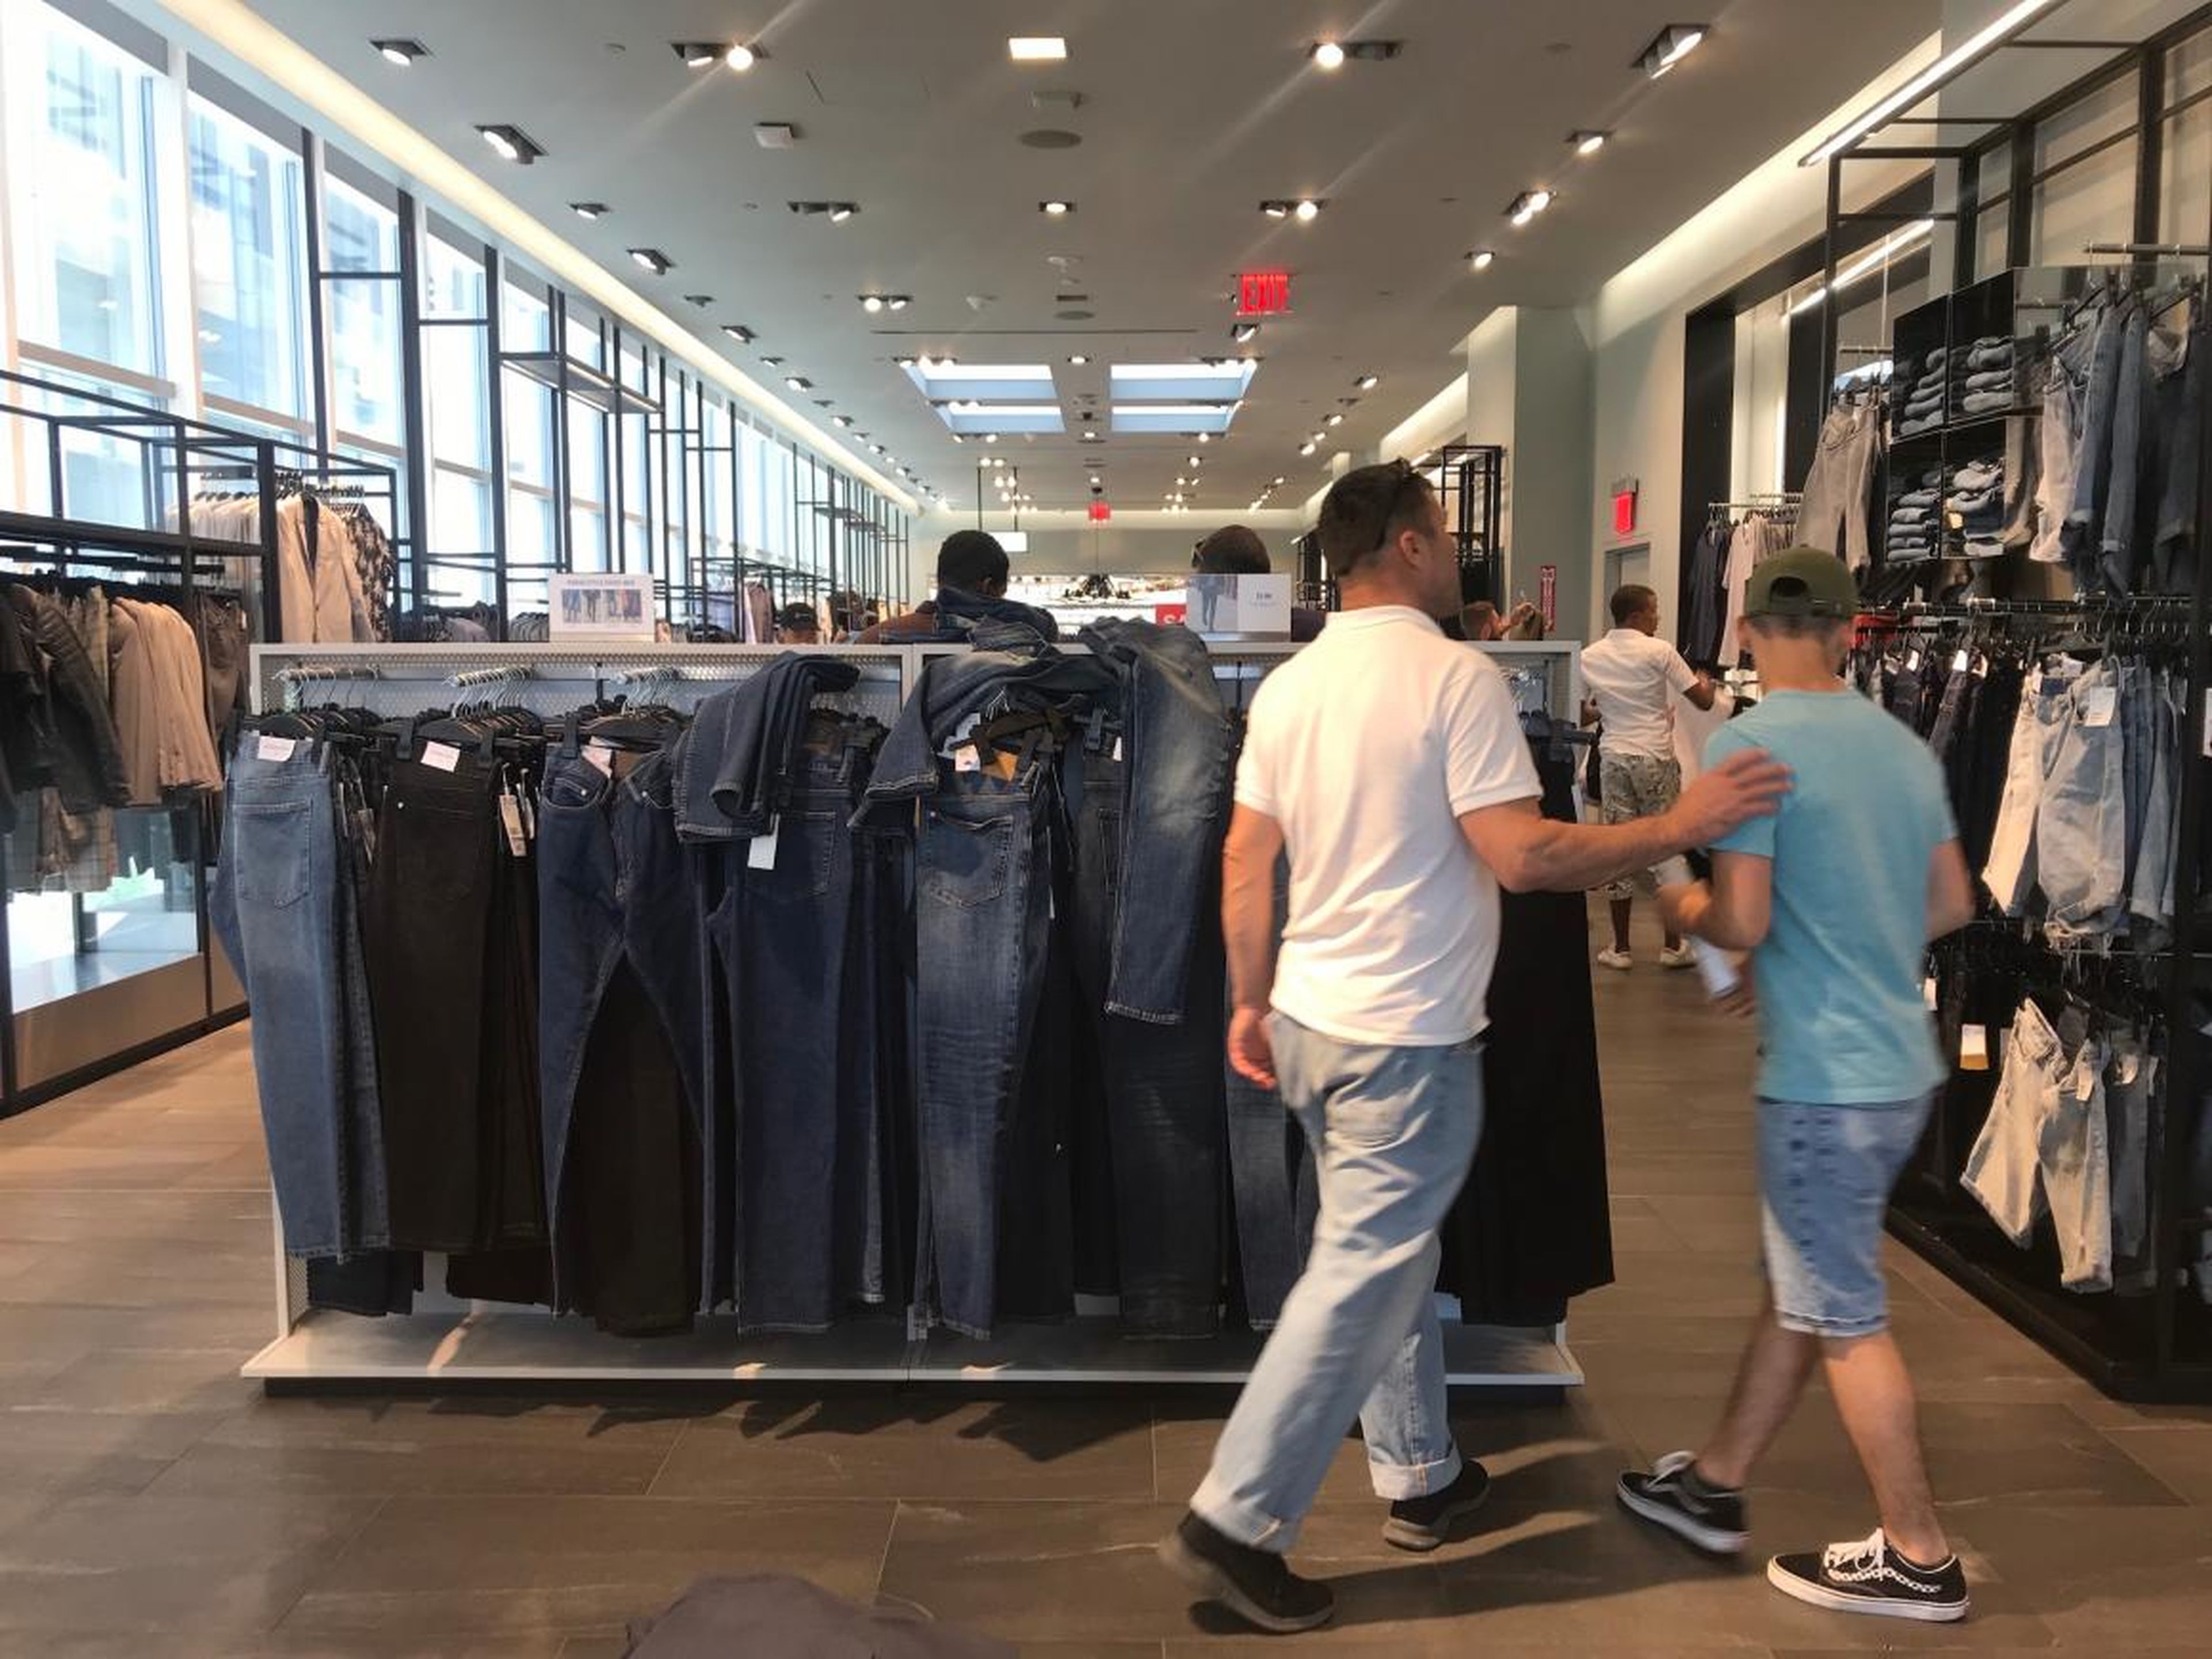 Though men's apparel comprises a comparatively smaller portion of H&M's inventory, the section was particularly busy.